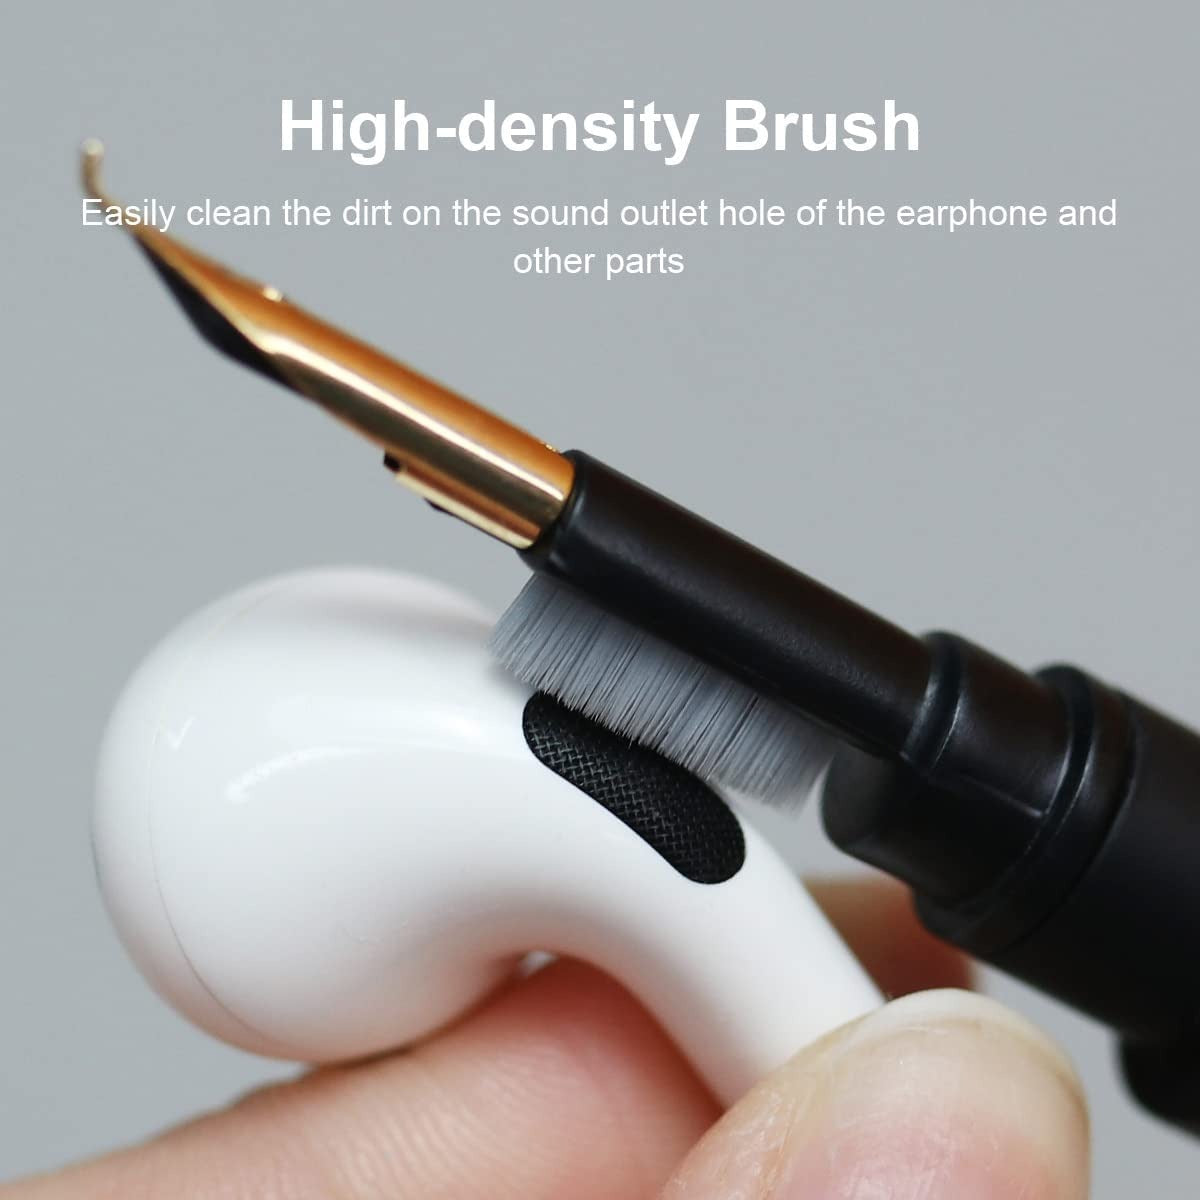 Cleaner Kit for Airpods Pro 1 2 Earbuds Cleaning Pen Brush Tool Earphones  Case